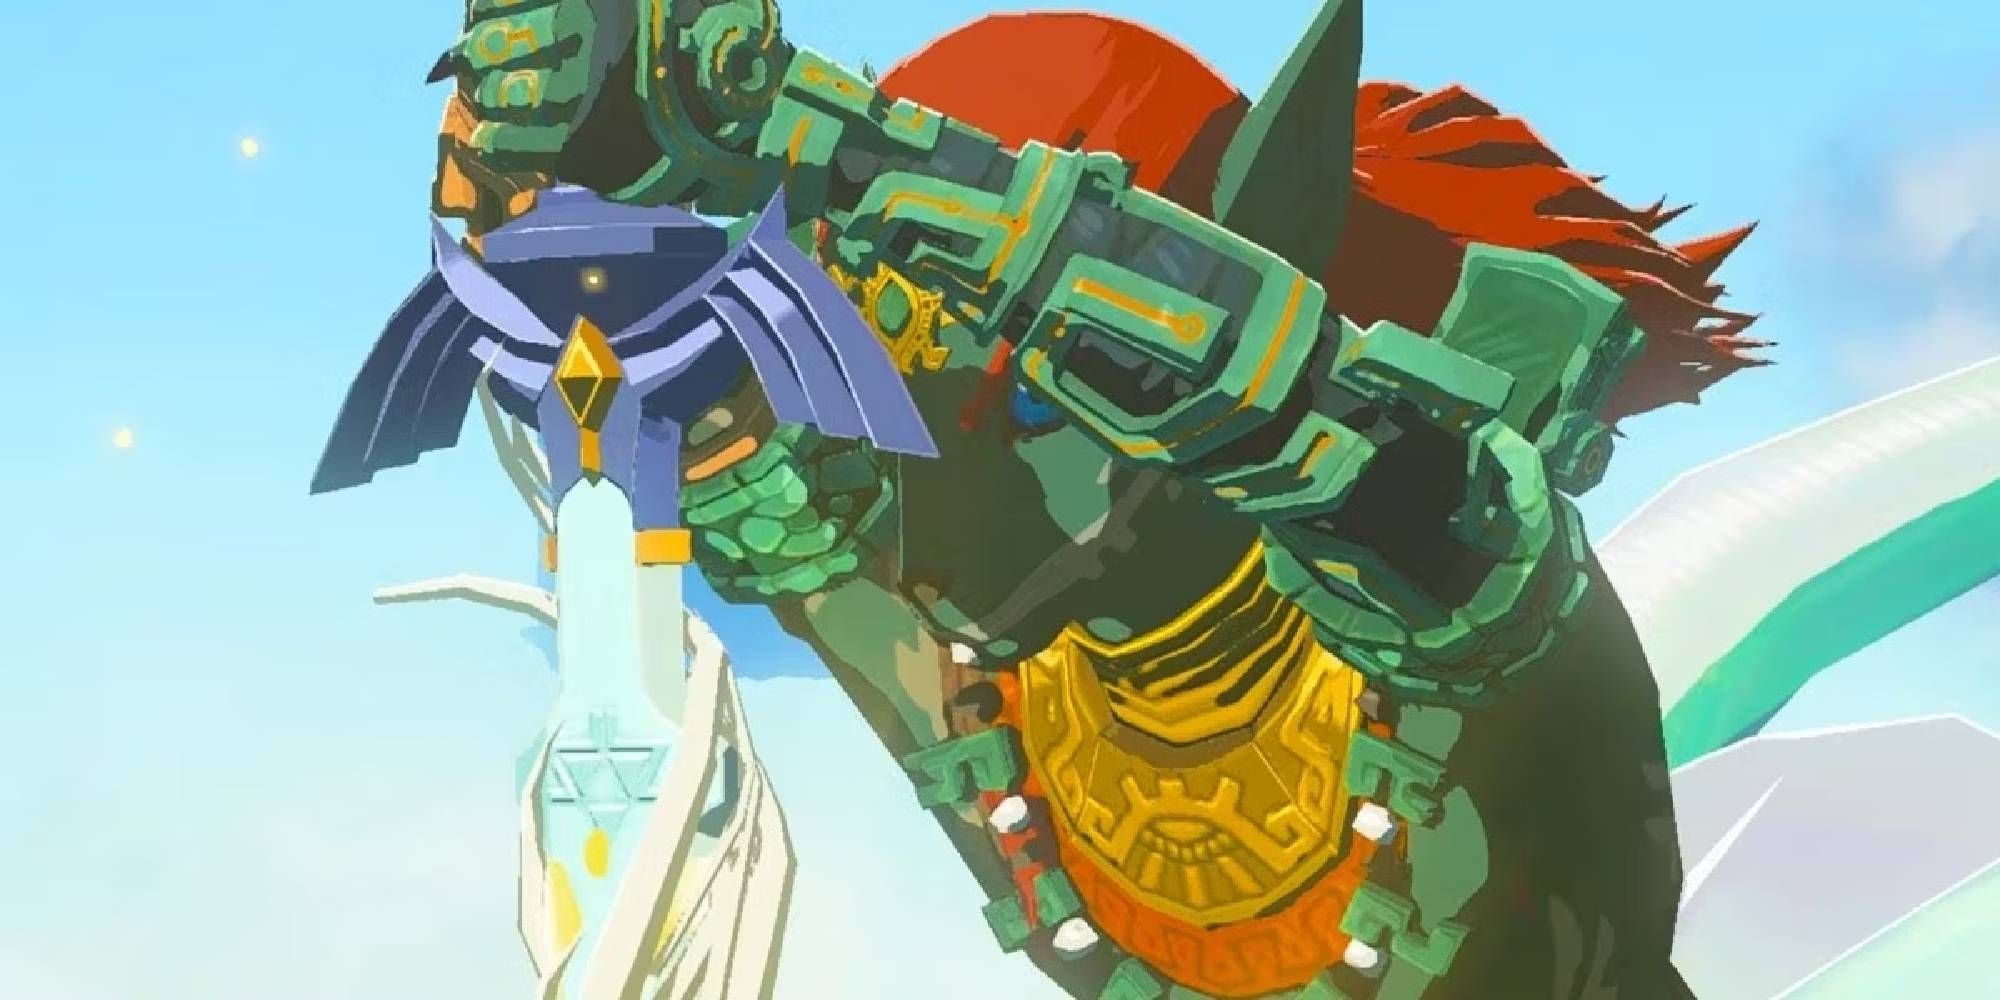 The Ancient Hero pulling the Master Sword from the head of the Dragon of Light